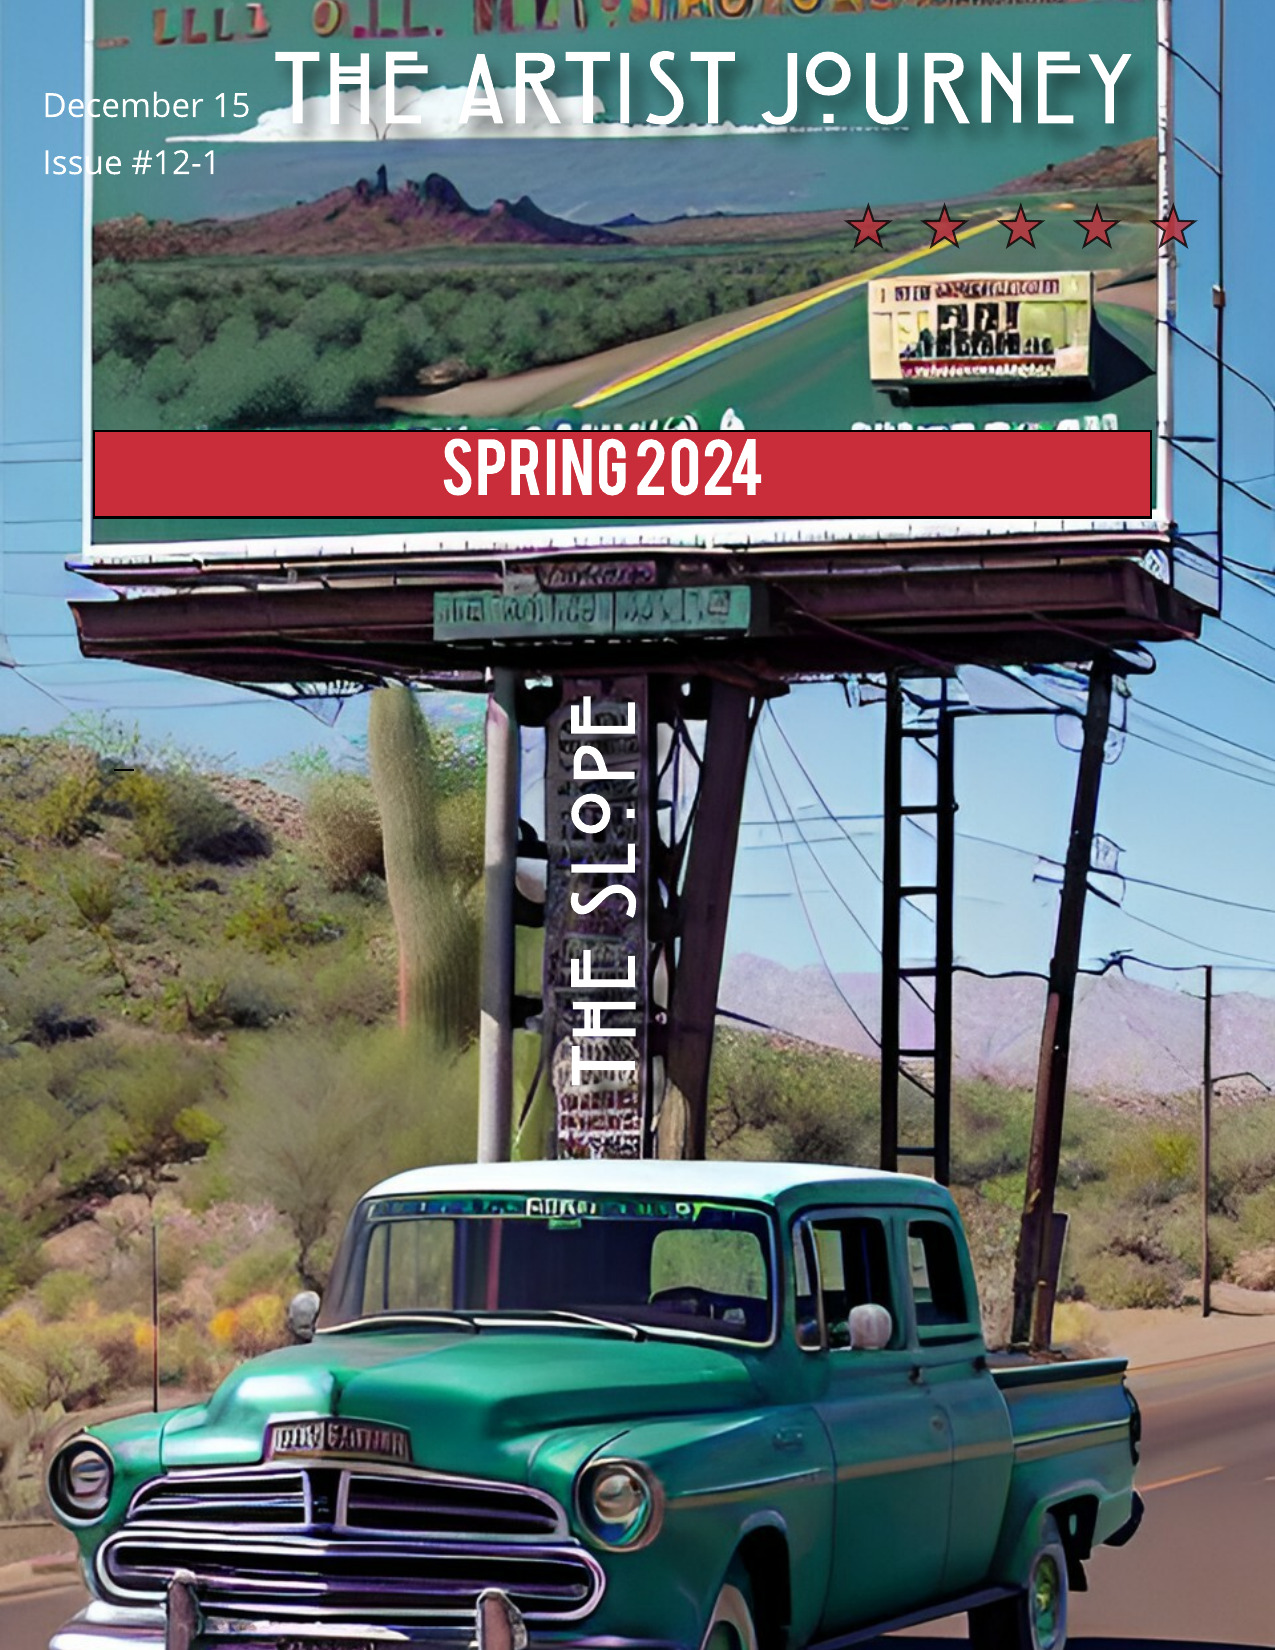 Image of a billboard depicting a magazine cover of: The Artist Journey 